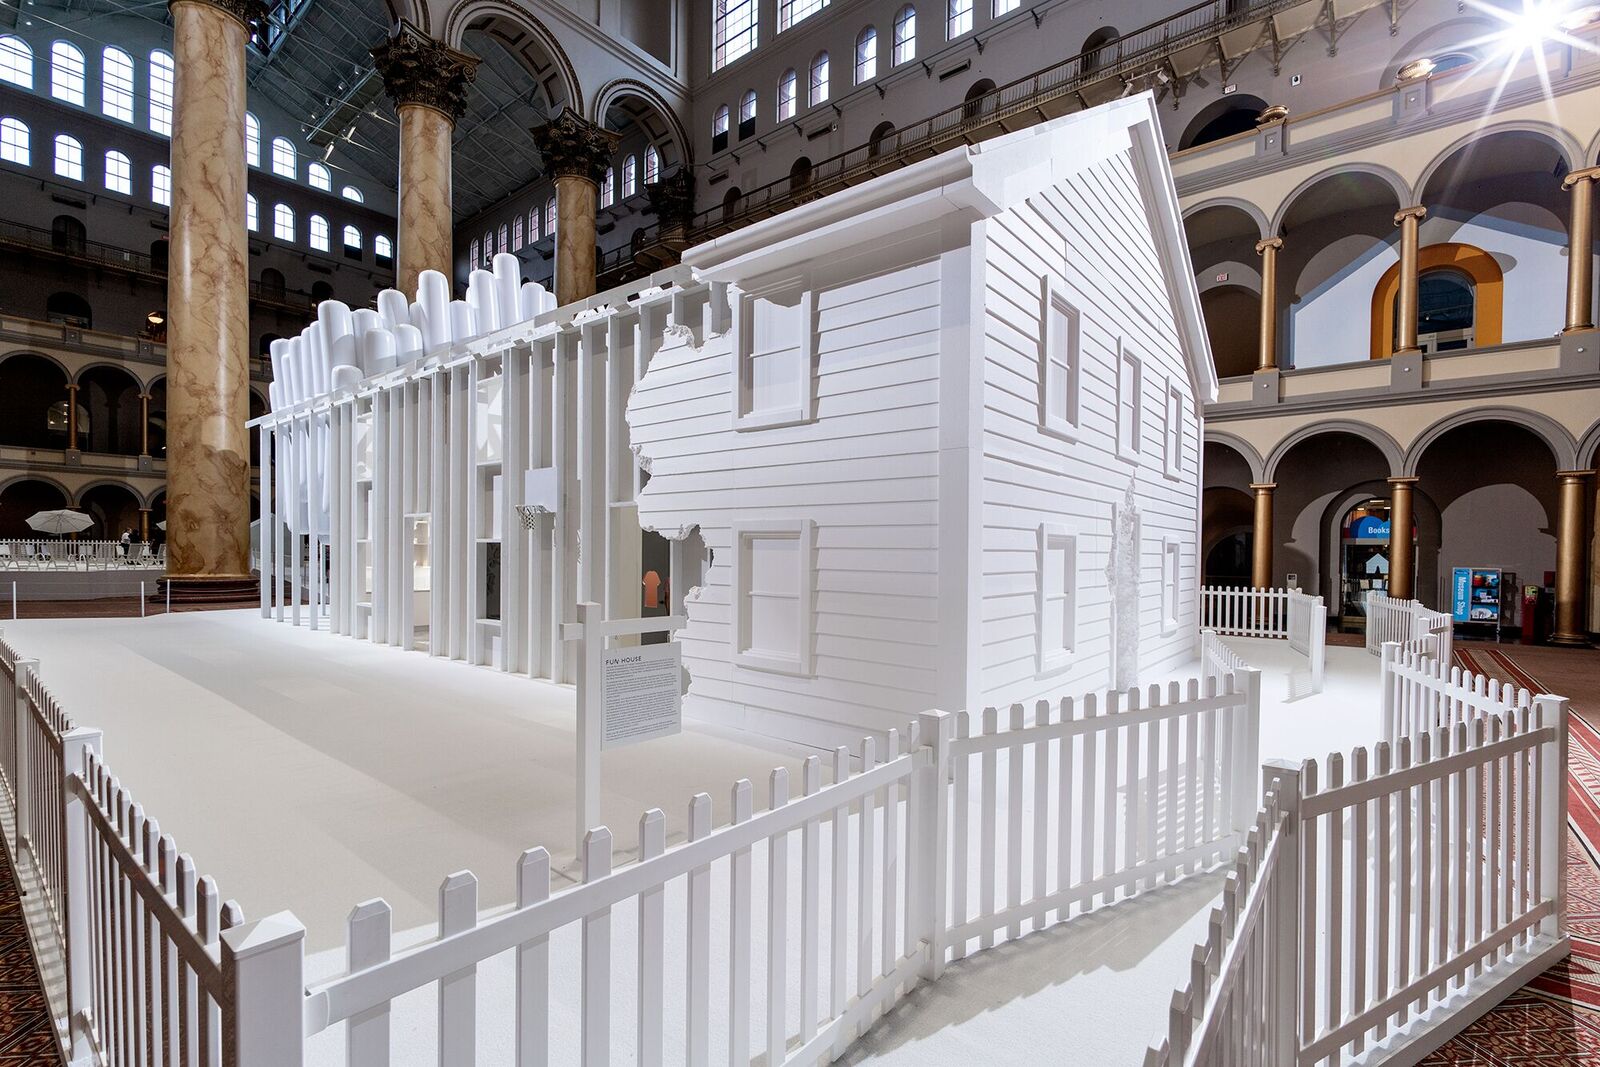 The Fun House installation by Snarkitecture at the @BuildingMuseum